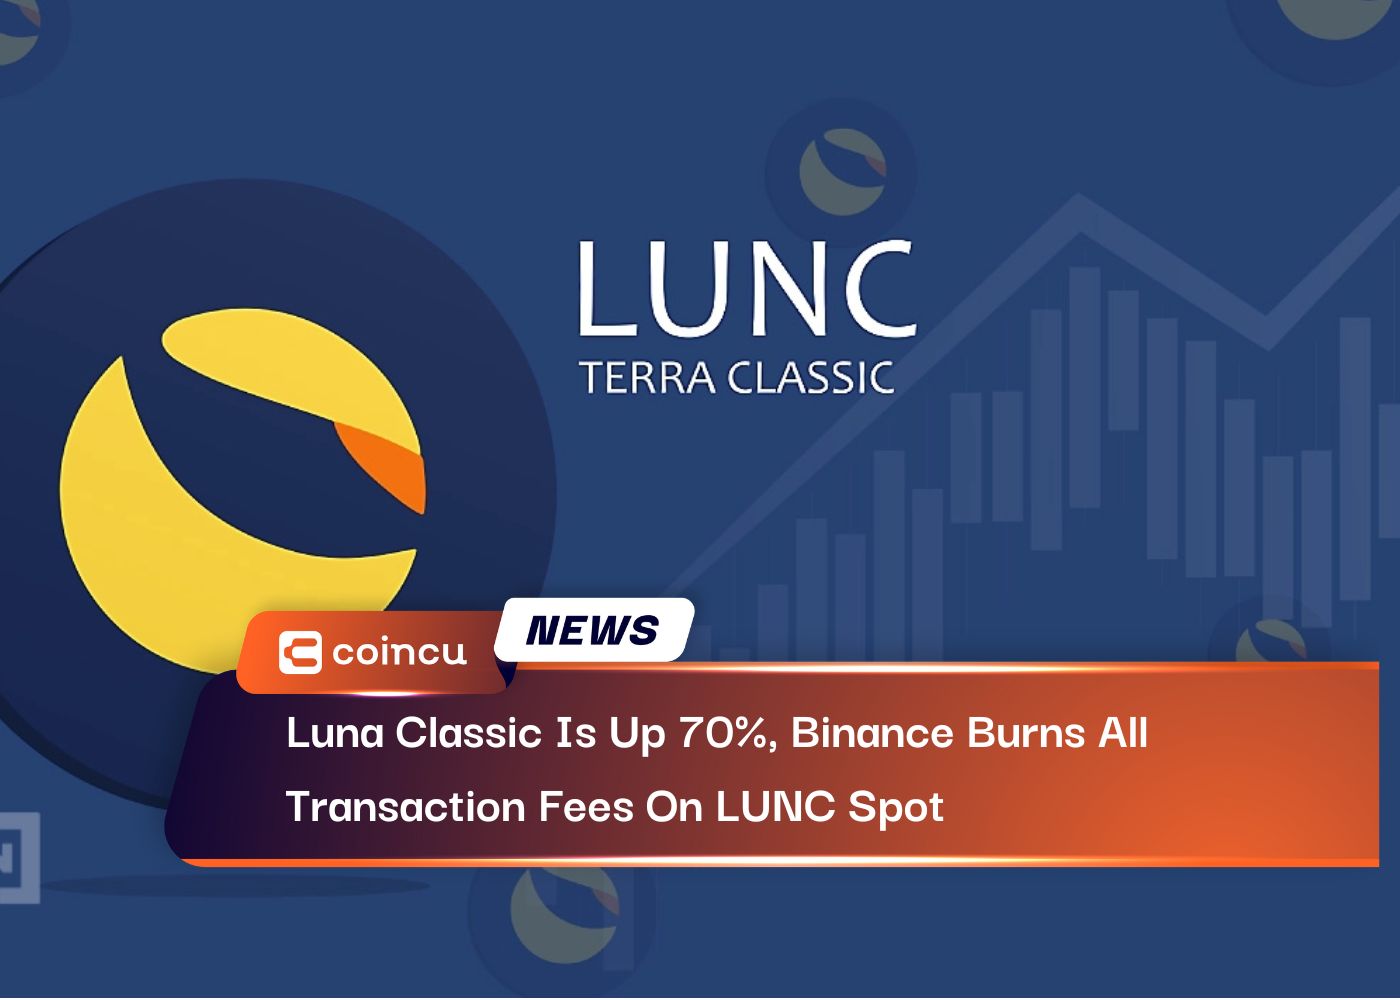 Luna Classic Is Up 70%, Binance Burns All Transaction Fees On LUNC Spot